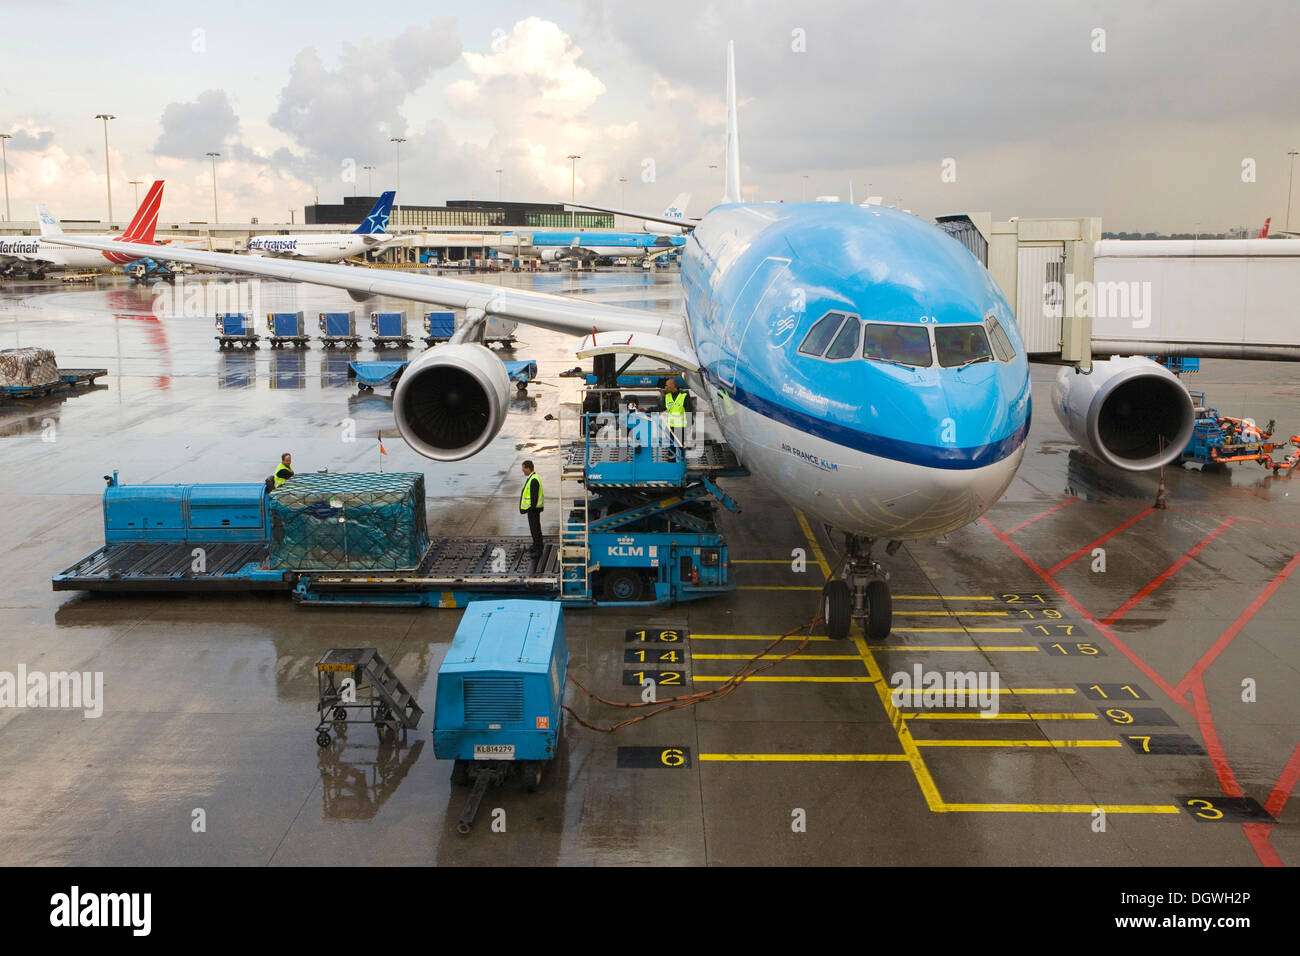 Airbus A330-200 aircraft of KLM during handling at Schiphol Airport, Amsterdam, The Netherlands, Europe Stock Photo